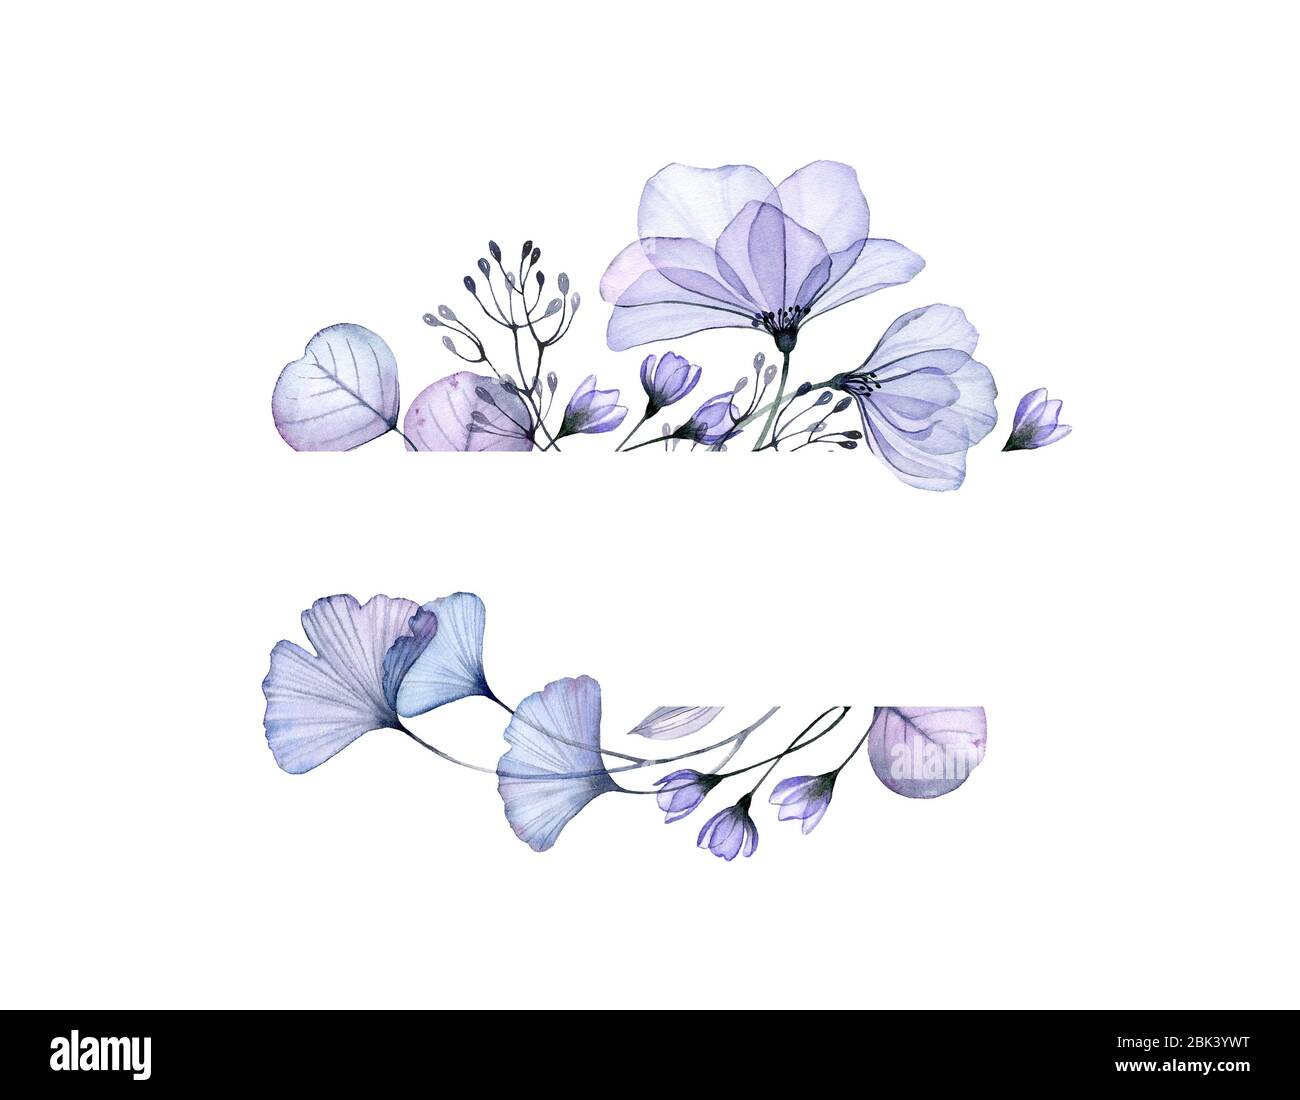 https://c8.alamy.com/comp/2BK3YWT/watercolor-floral-banner-horizontal-stripe-with-place-for-text-abstract-background-for-logo-isolated-hand-drawn-illustration-with-blue-purple-2BK3YWT.jpg